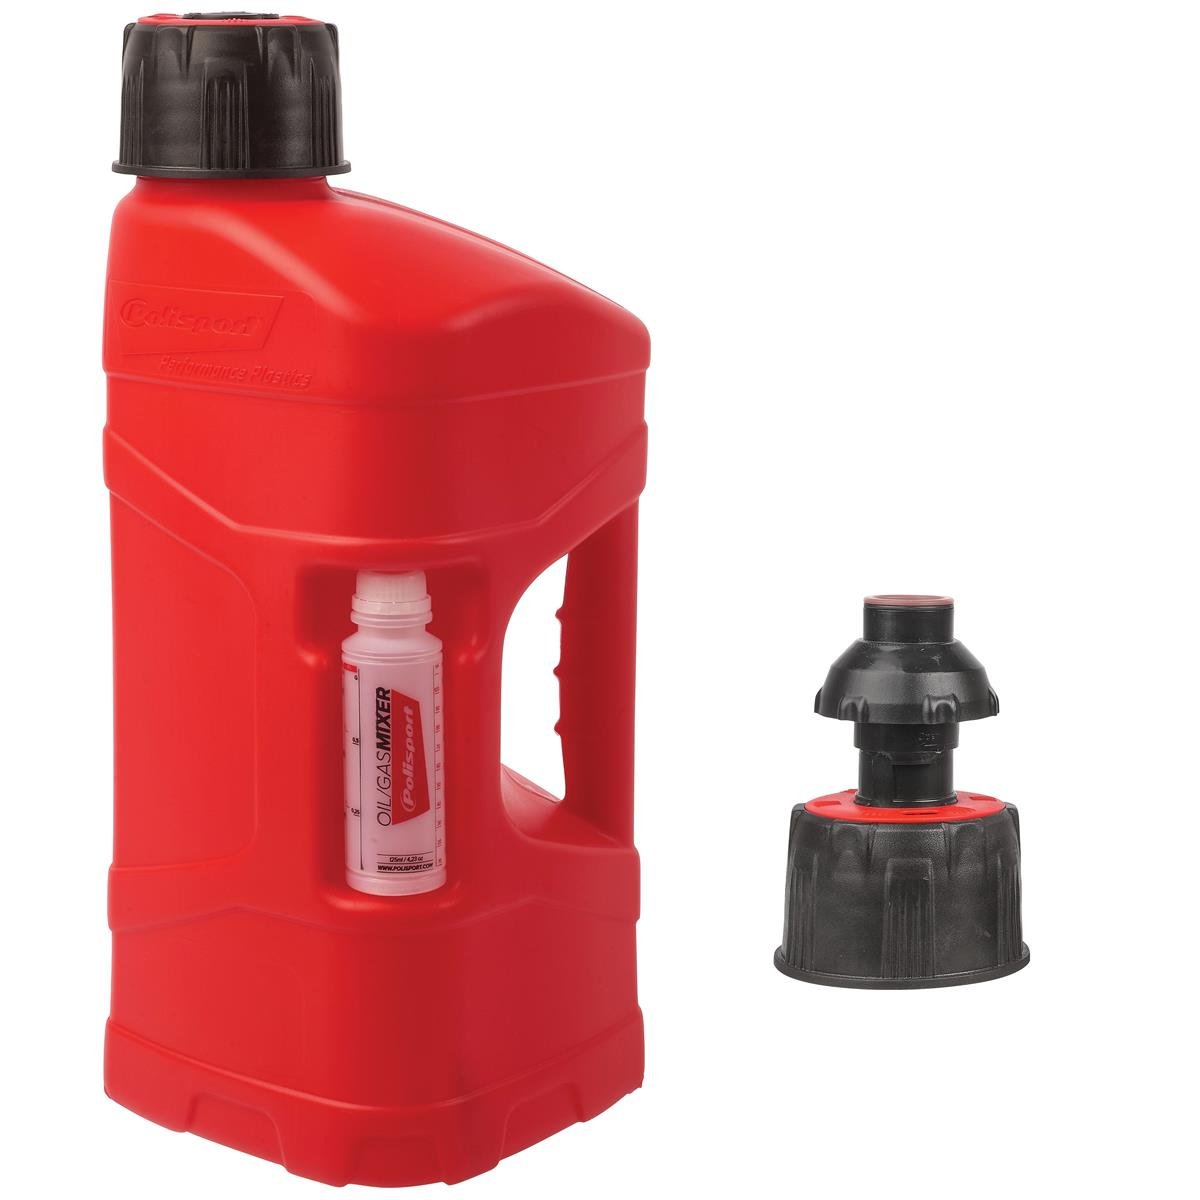 Polisport Gas Can ProOctane with Quick Tank System, 10 L, Red